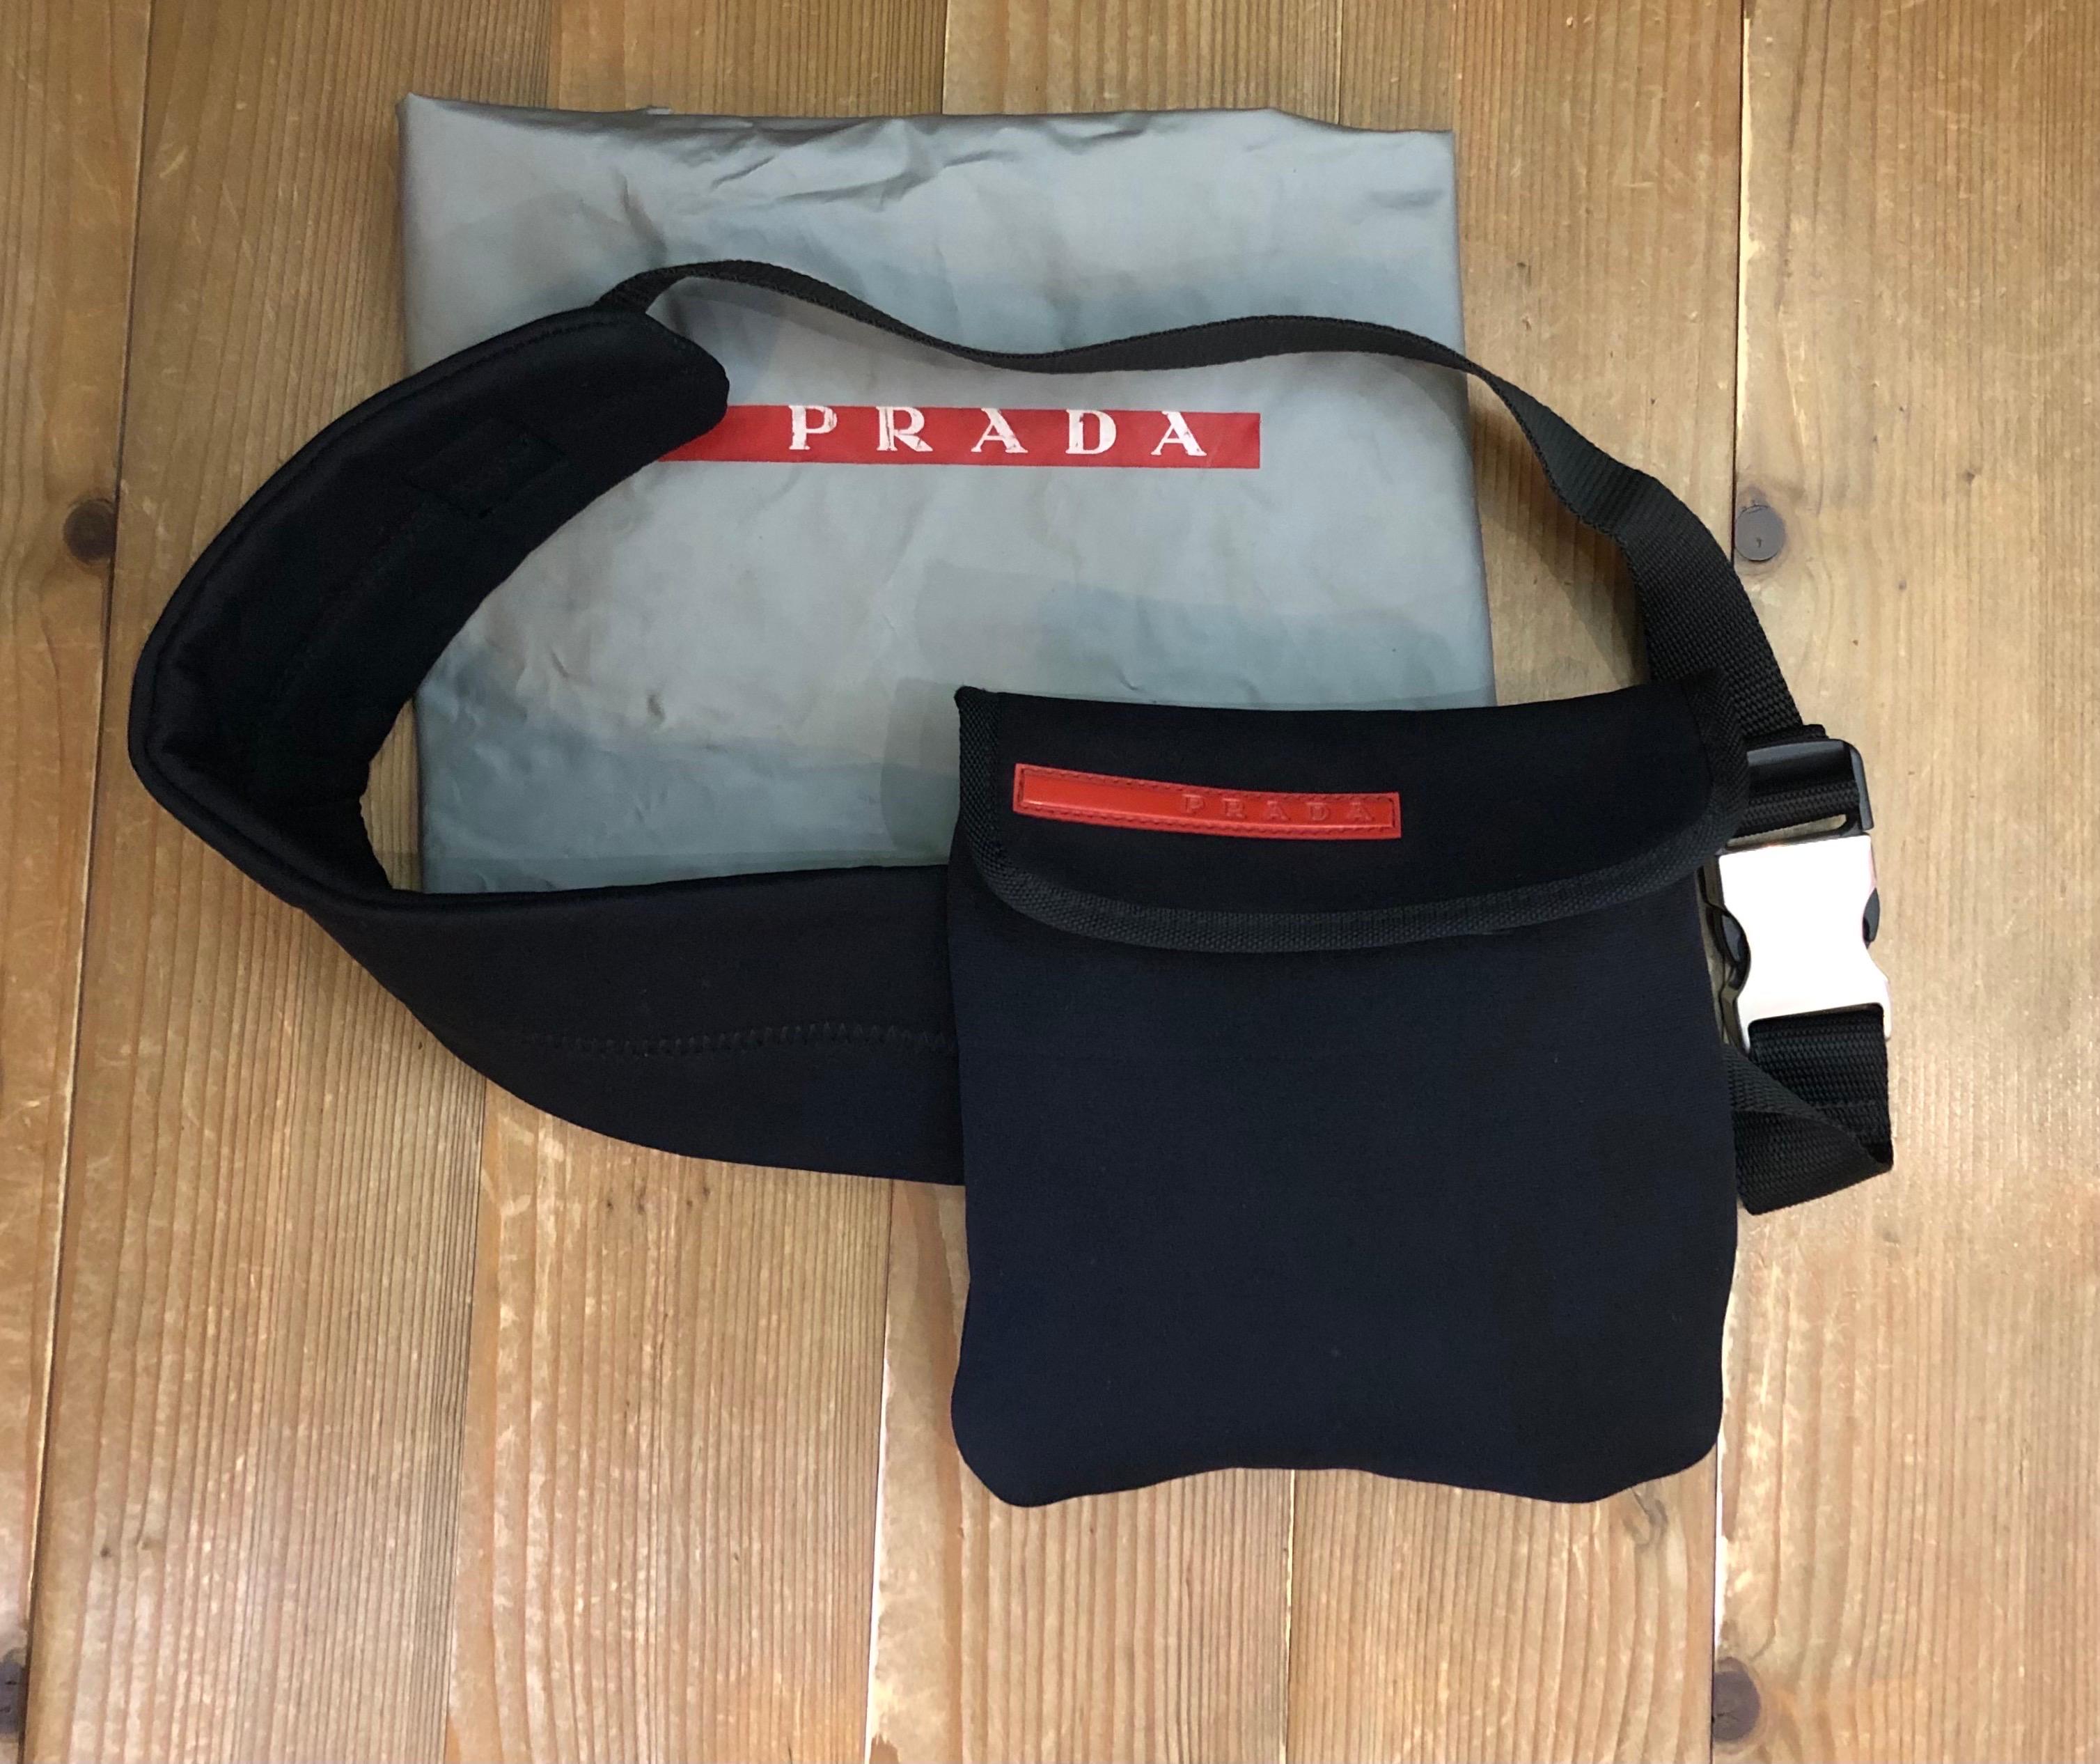 This vintage PRADA Sports Line belt bag is crafted of light-weight microfiber fabric in black featuring a detachable belt of the same microfiber and polyester with adjustable stainless steel buckle. Front flap Velcro closure opens to a black